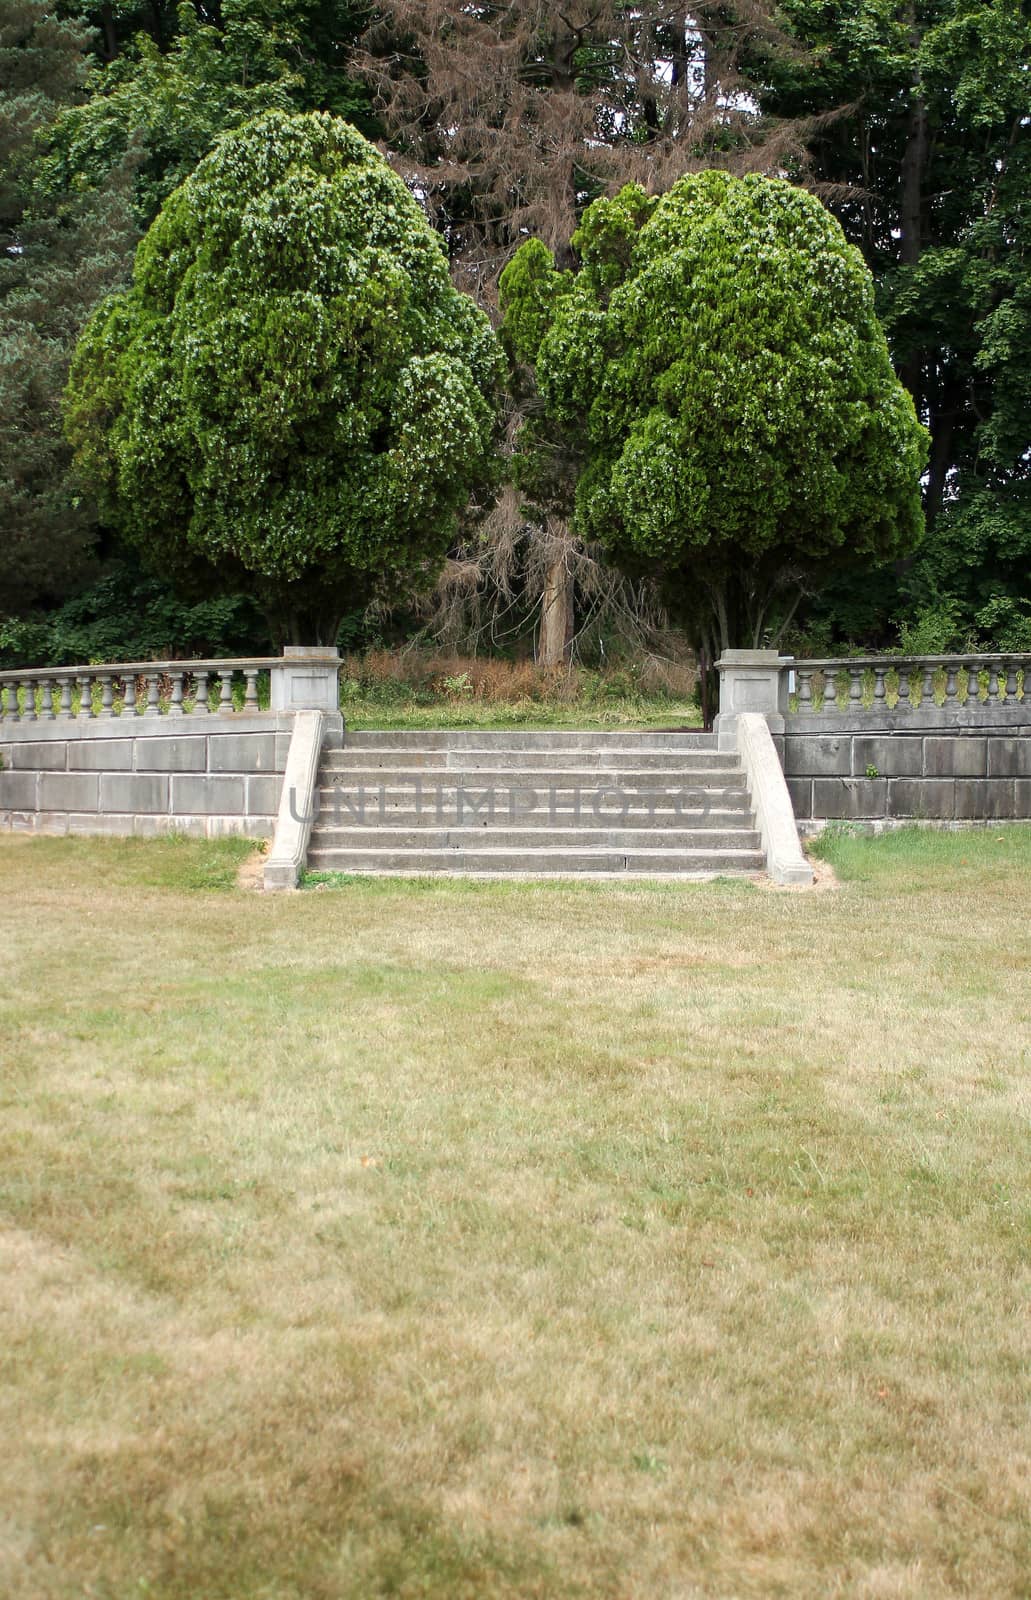 Some Stone steps with trees